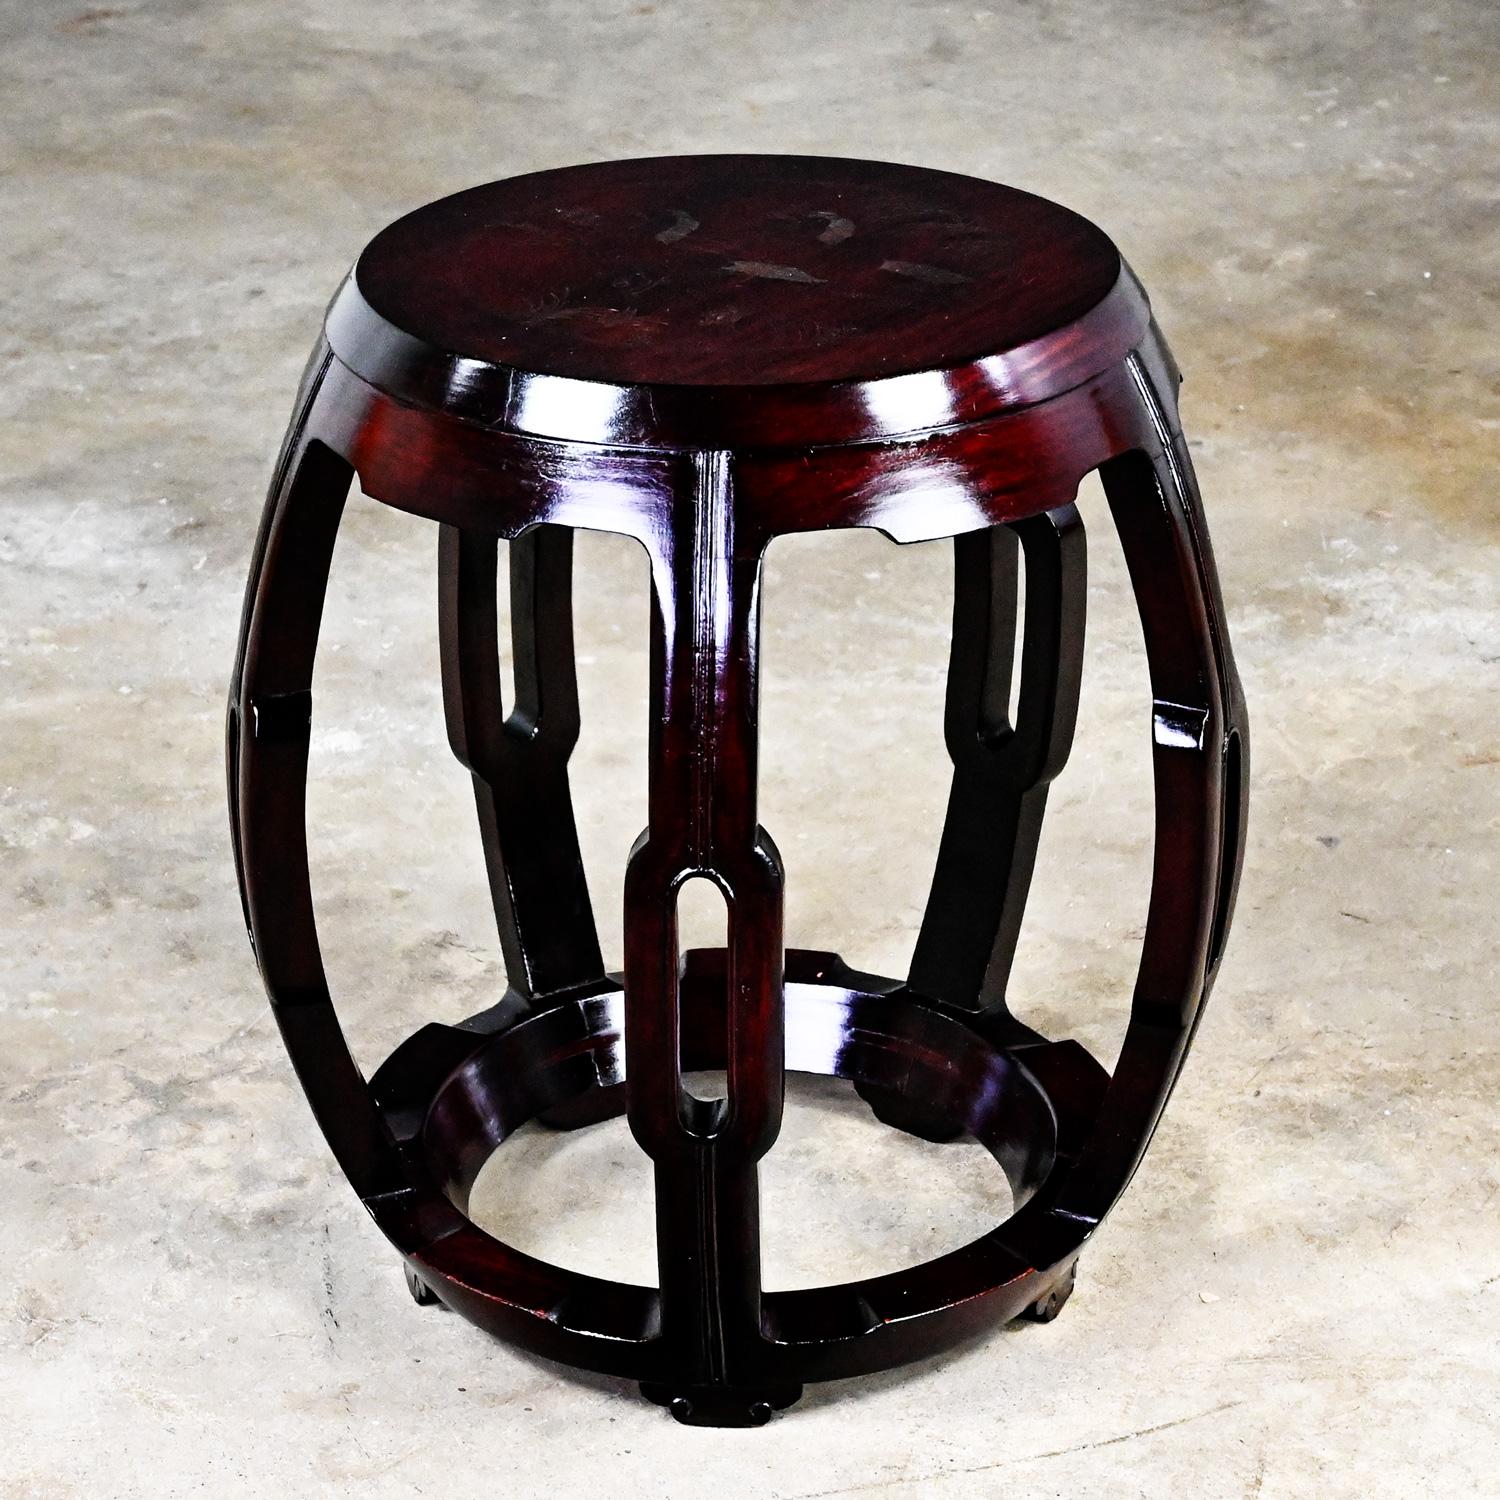 Mid 20th Century Chinoiserie Asian Rosewood Barrel Drum Table or Garden Stool For Sale 13